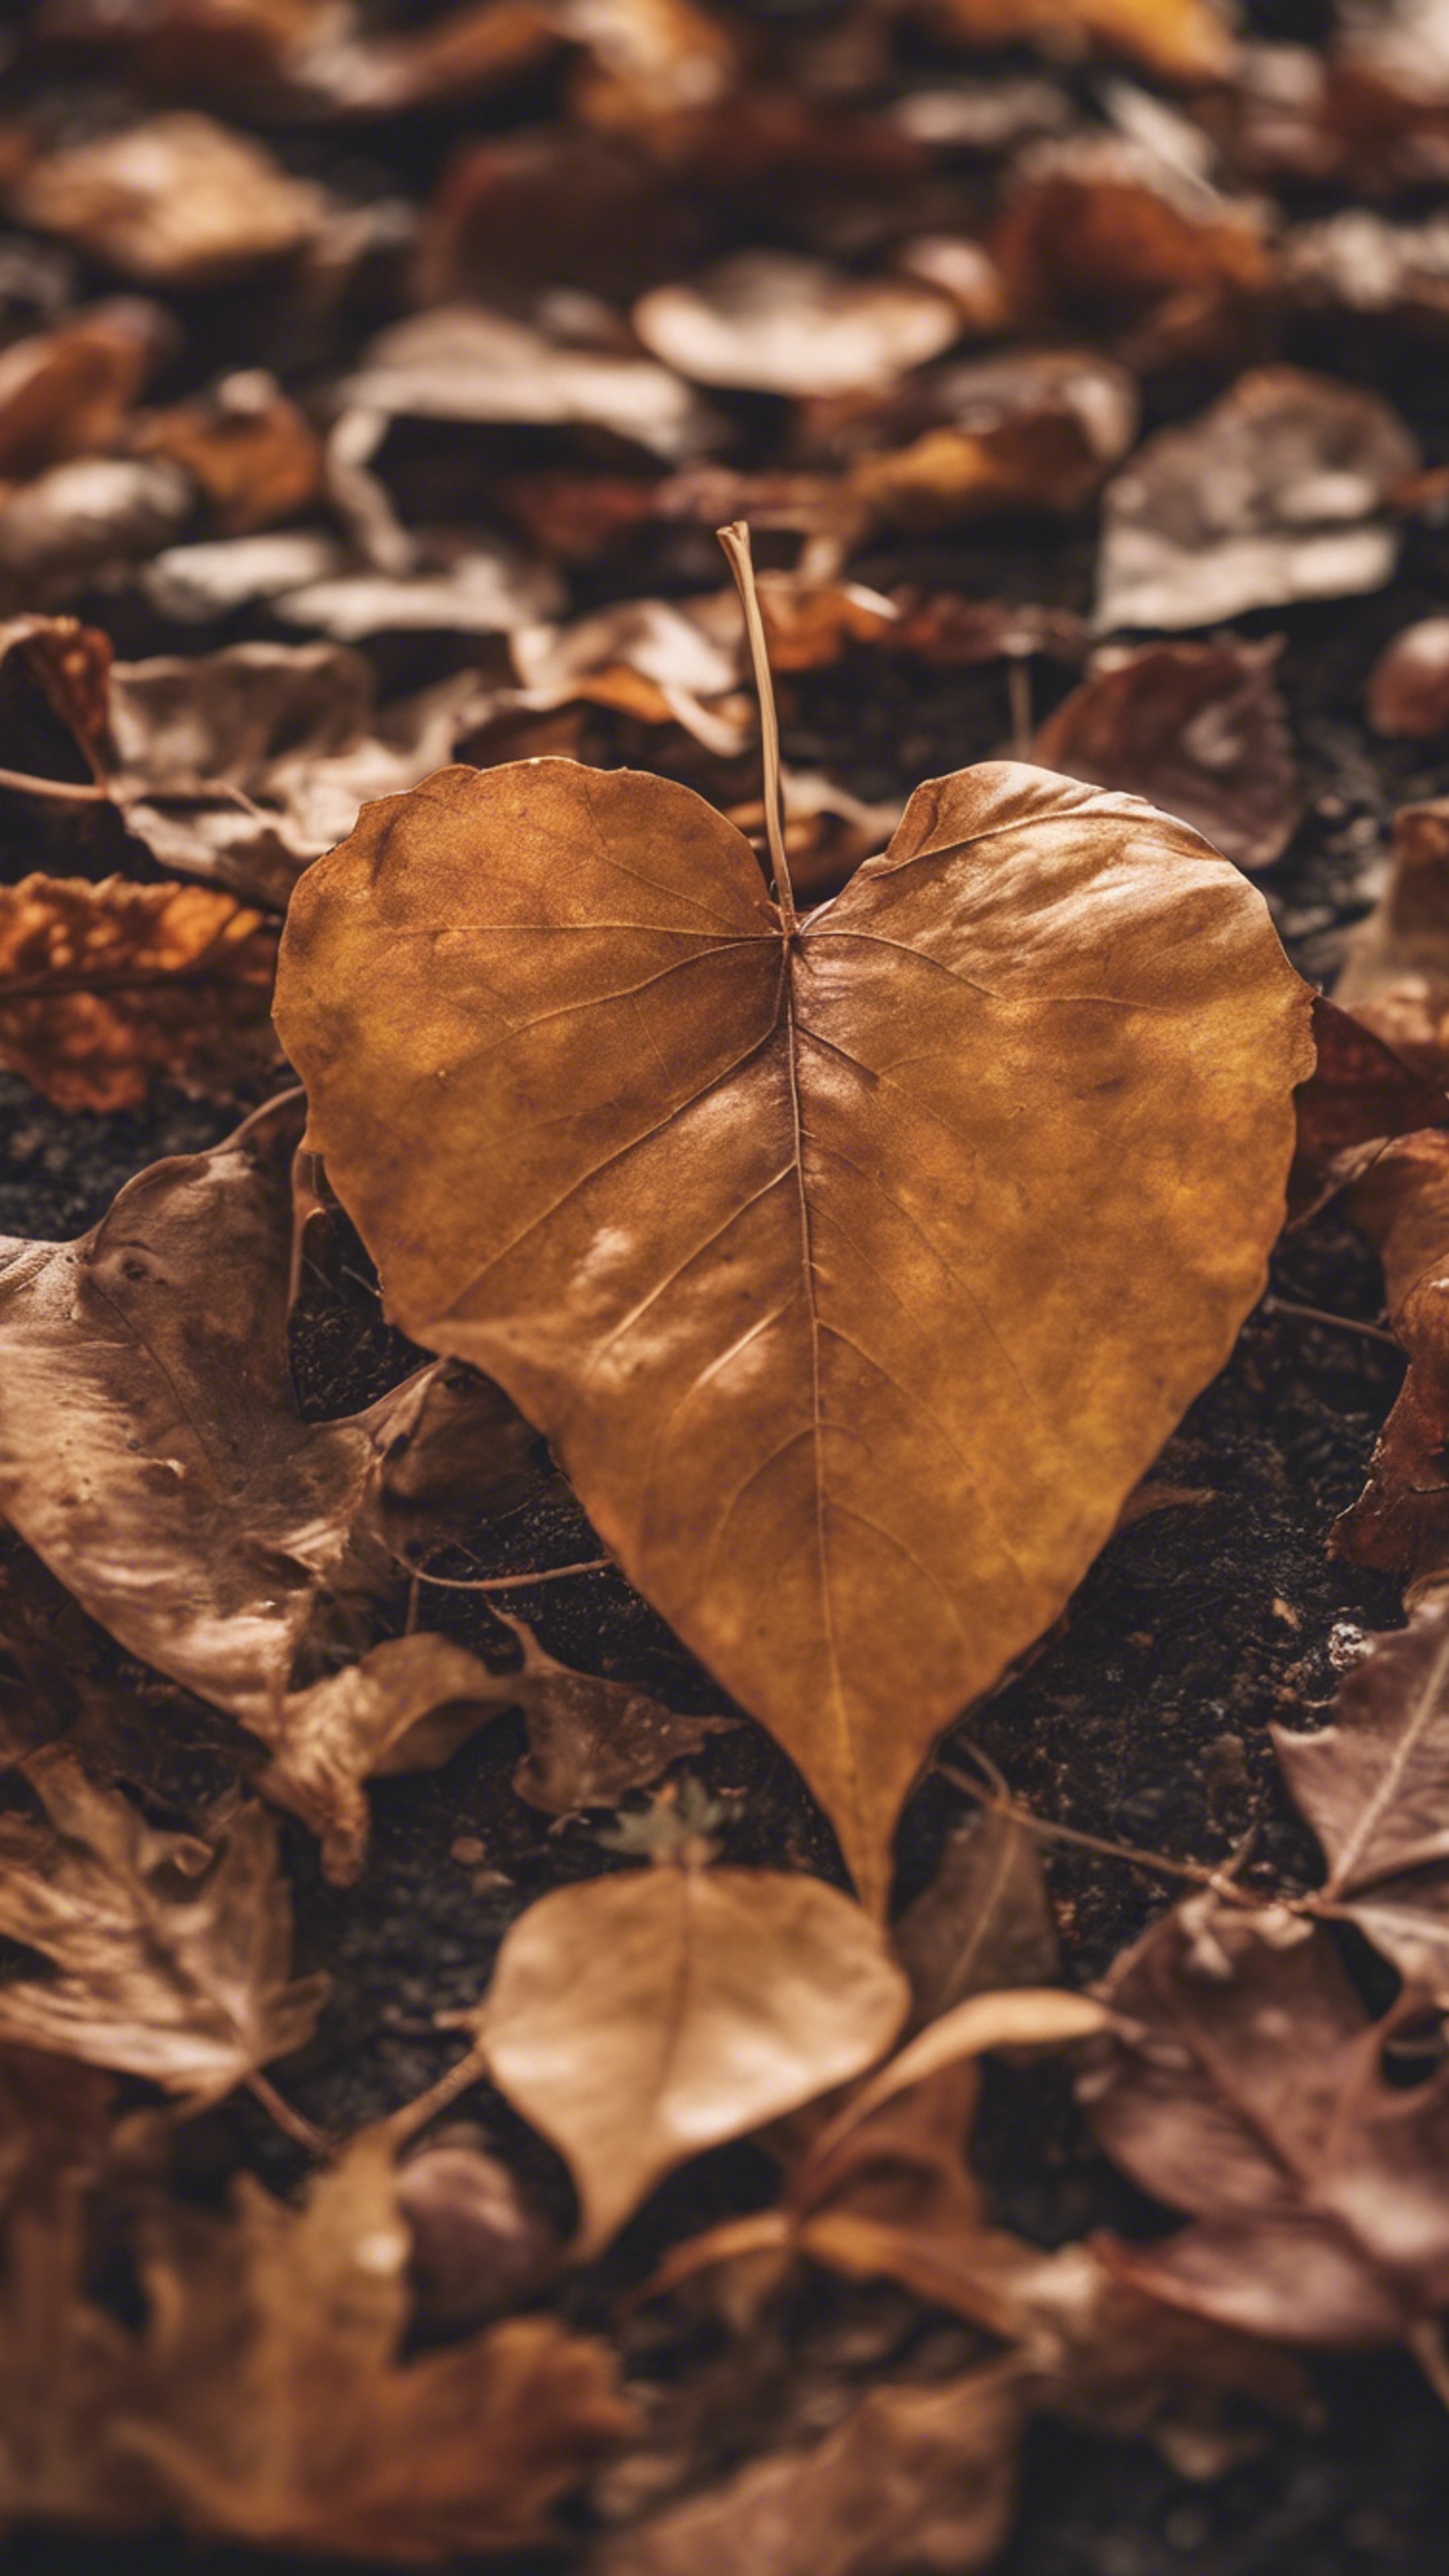 A brown heart-shaped leaf falling amidst other autumn leaves.壁紙[692d0bdb07c648f5916d]